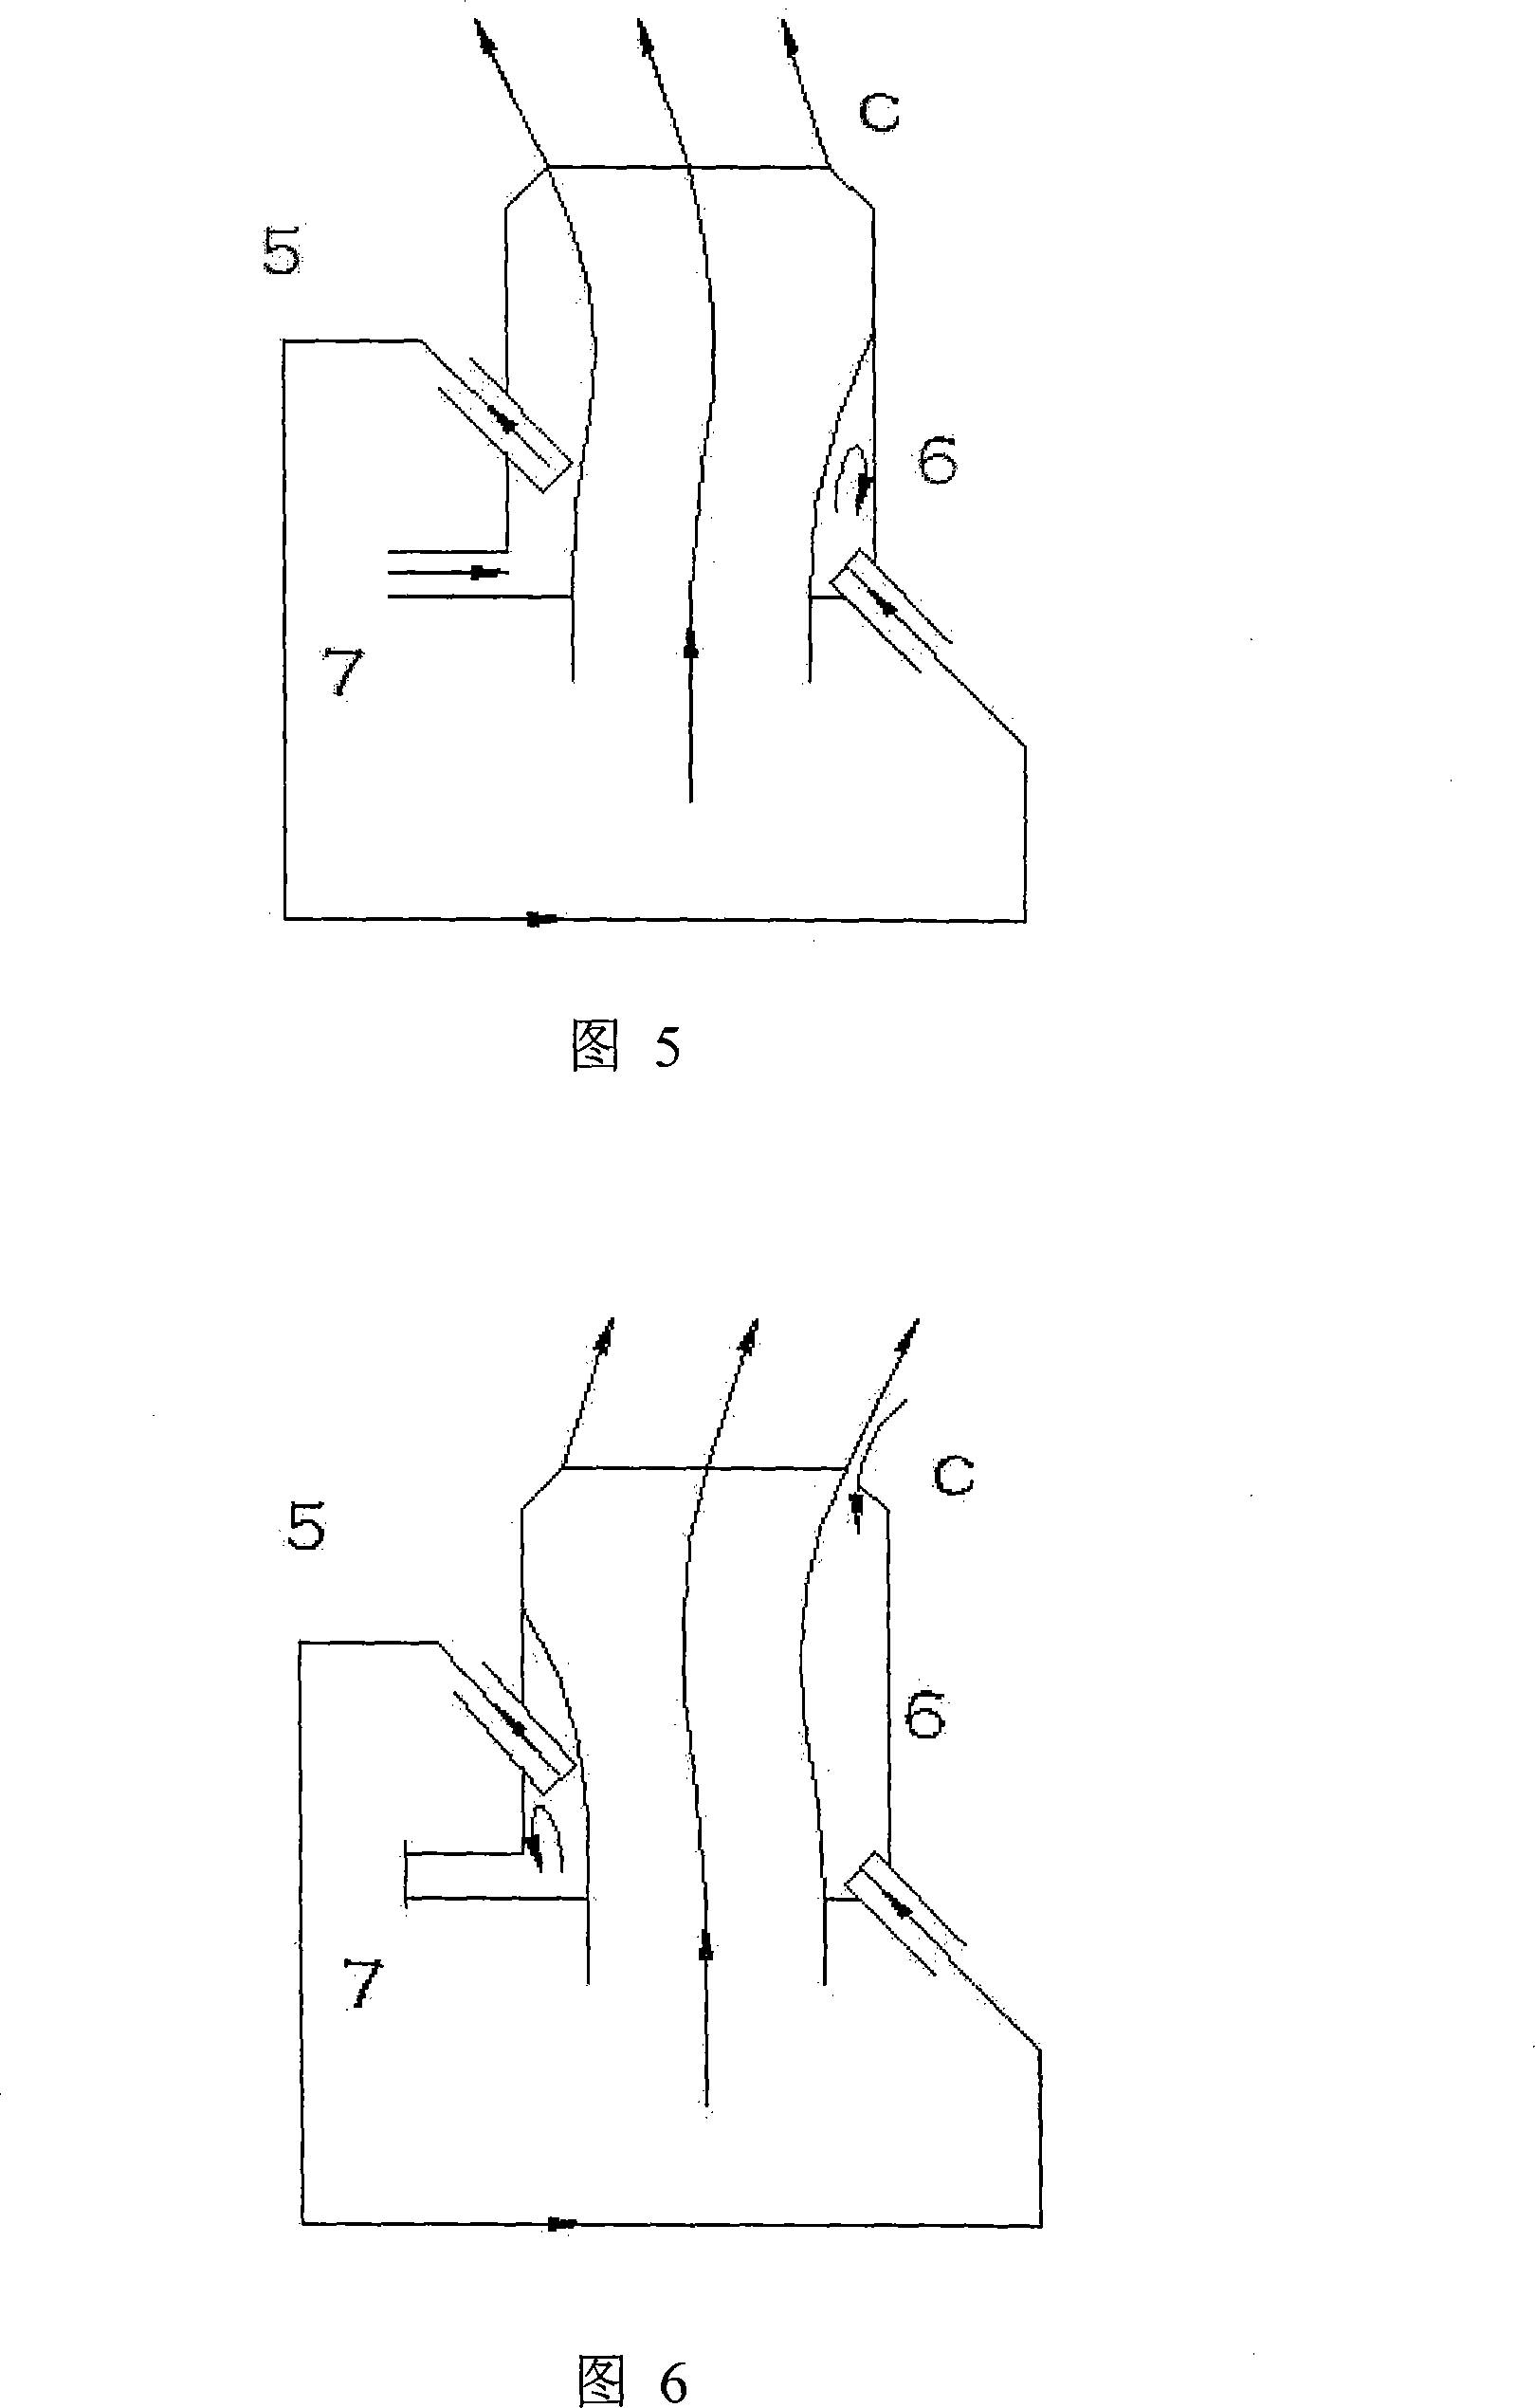 Special-shaped nozzle fluidics sprinkler